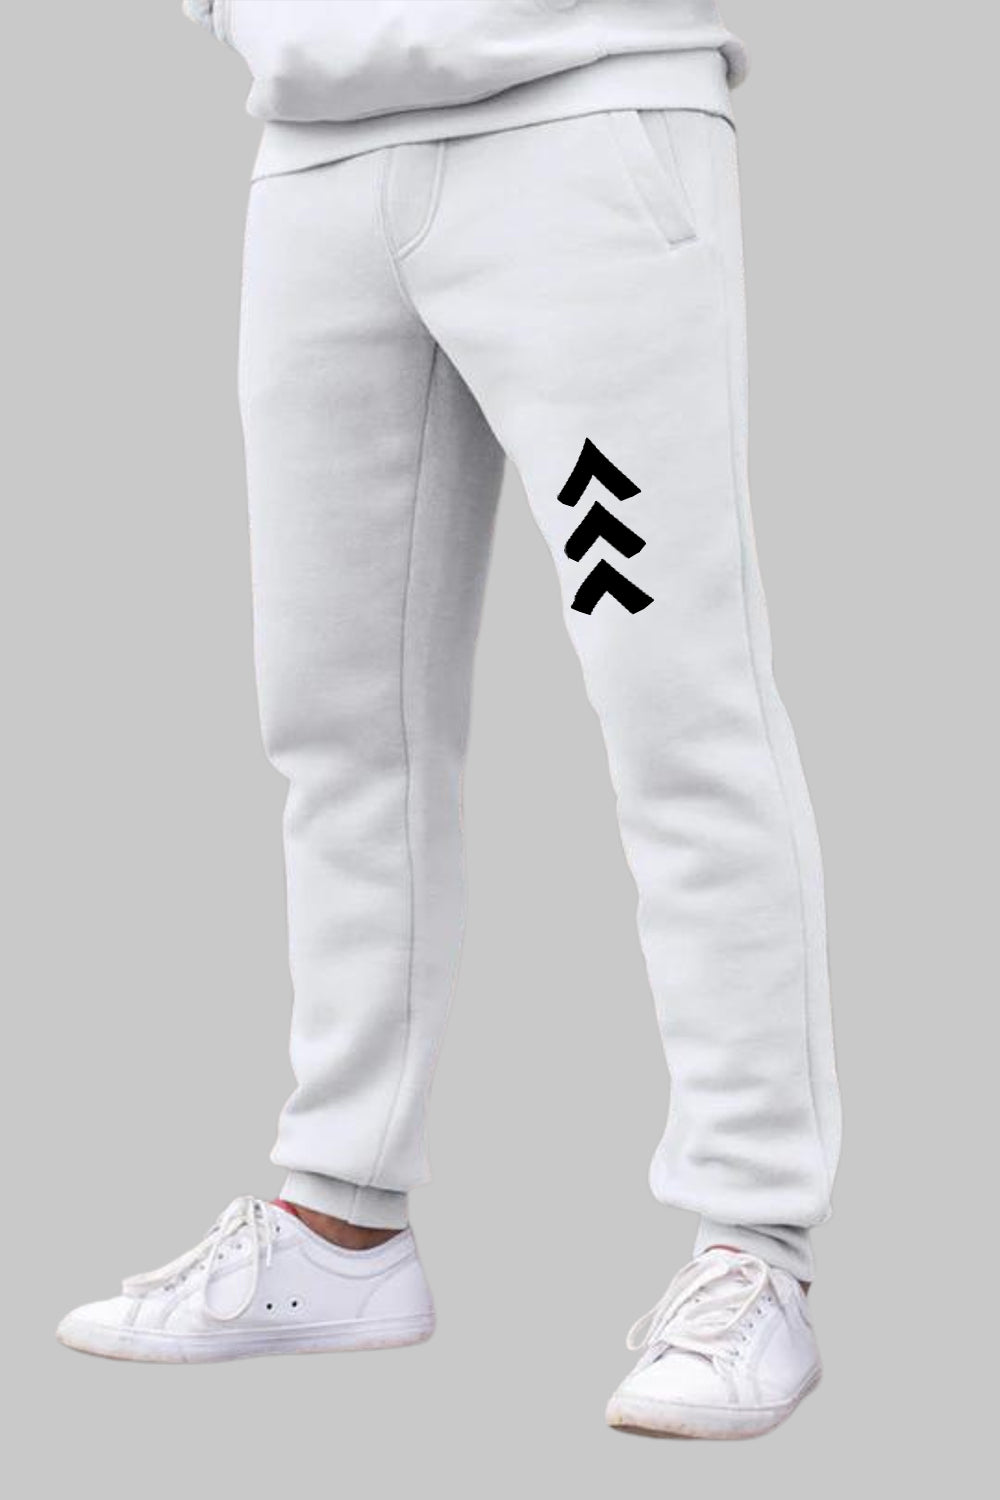 Arrow Graphic Printed White Joggers